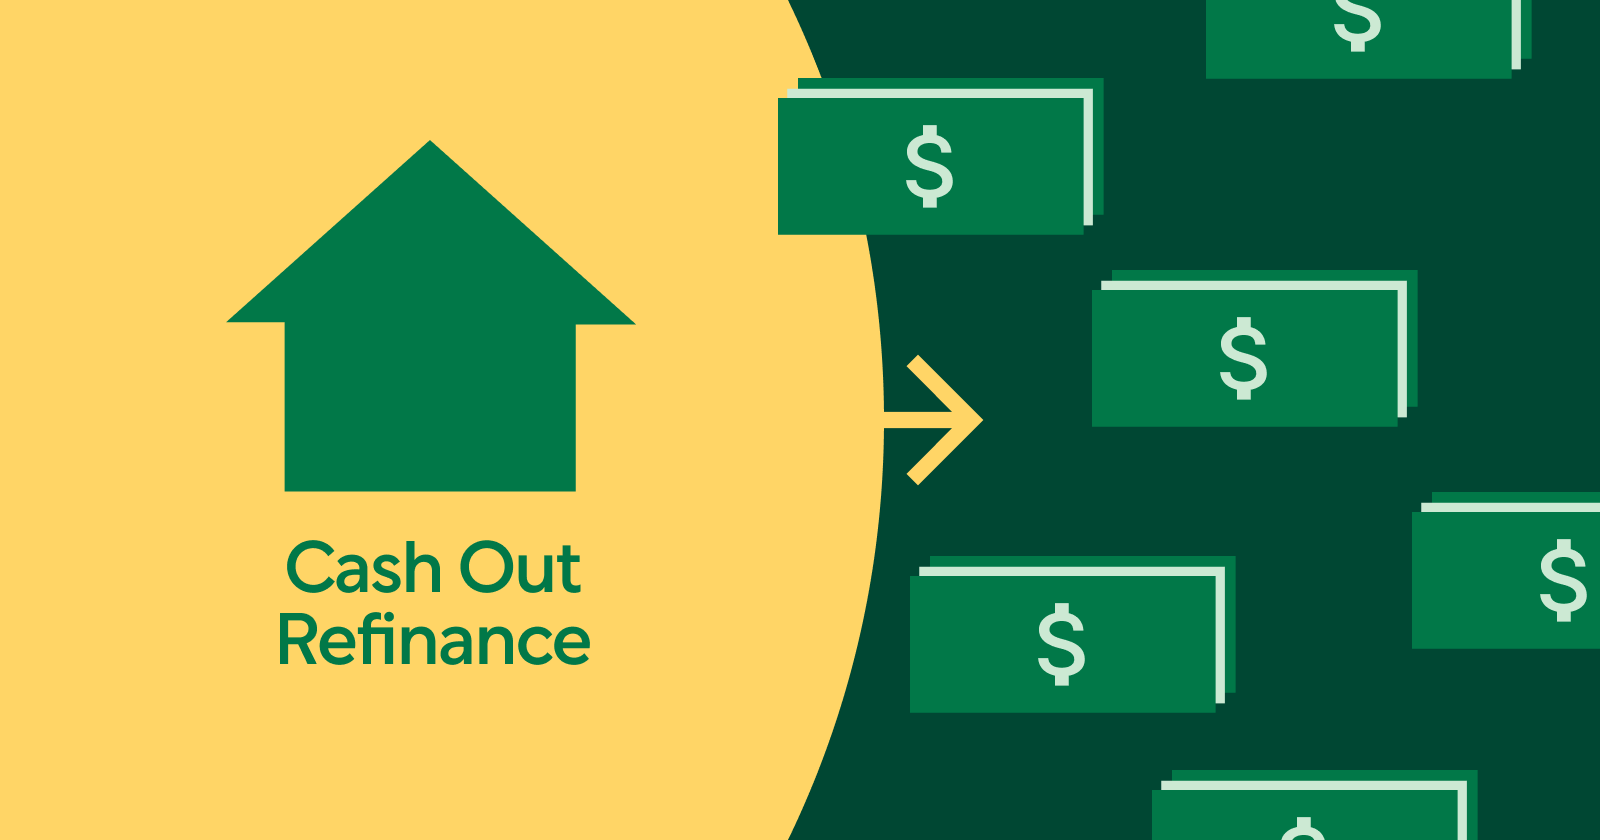 A Comprehensive Guide to Cash Out Refinance - Yellow and Green Image of Green Arrow Pointing Up and Dollar Bills